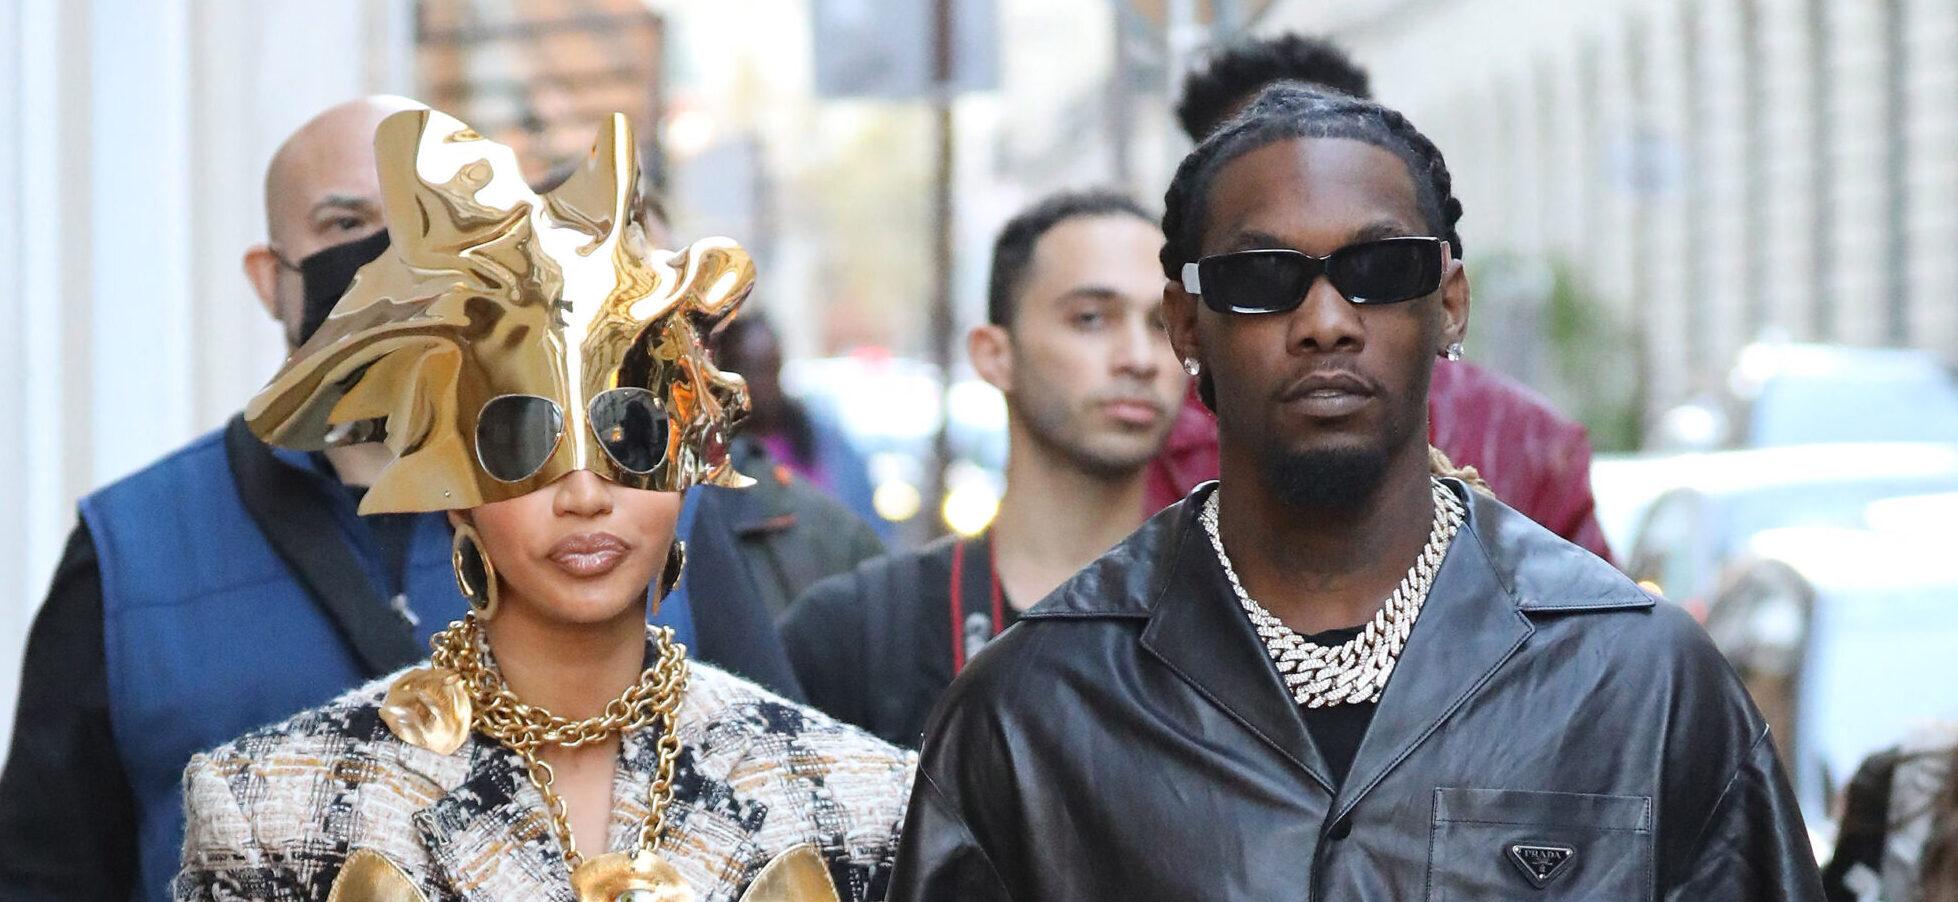 Cardi B and Offset seen shopping at Dior store in Paris